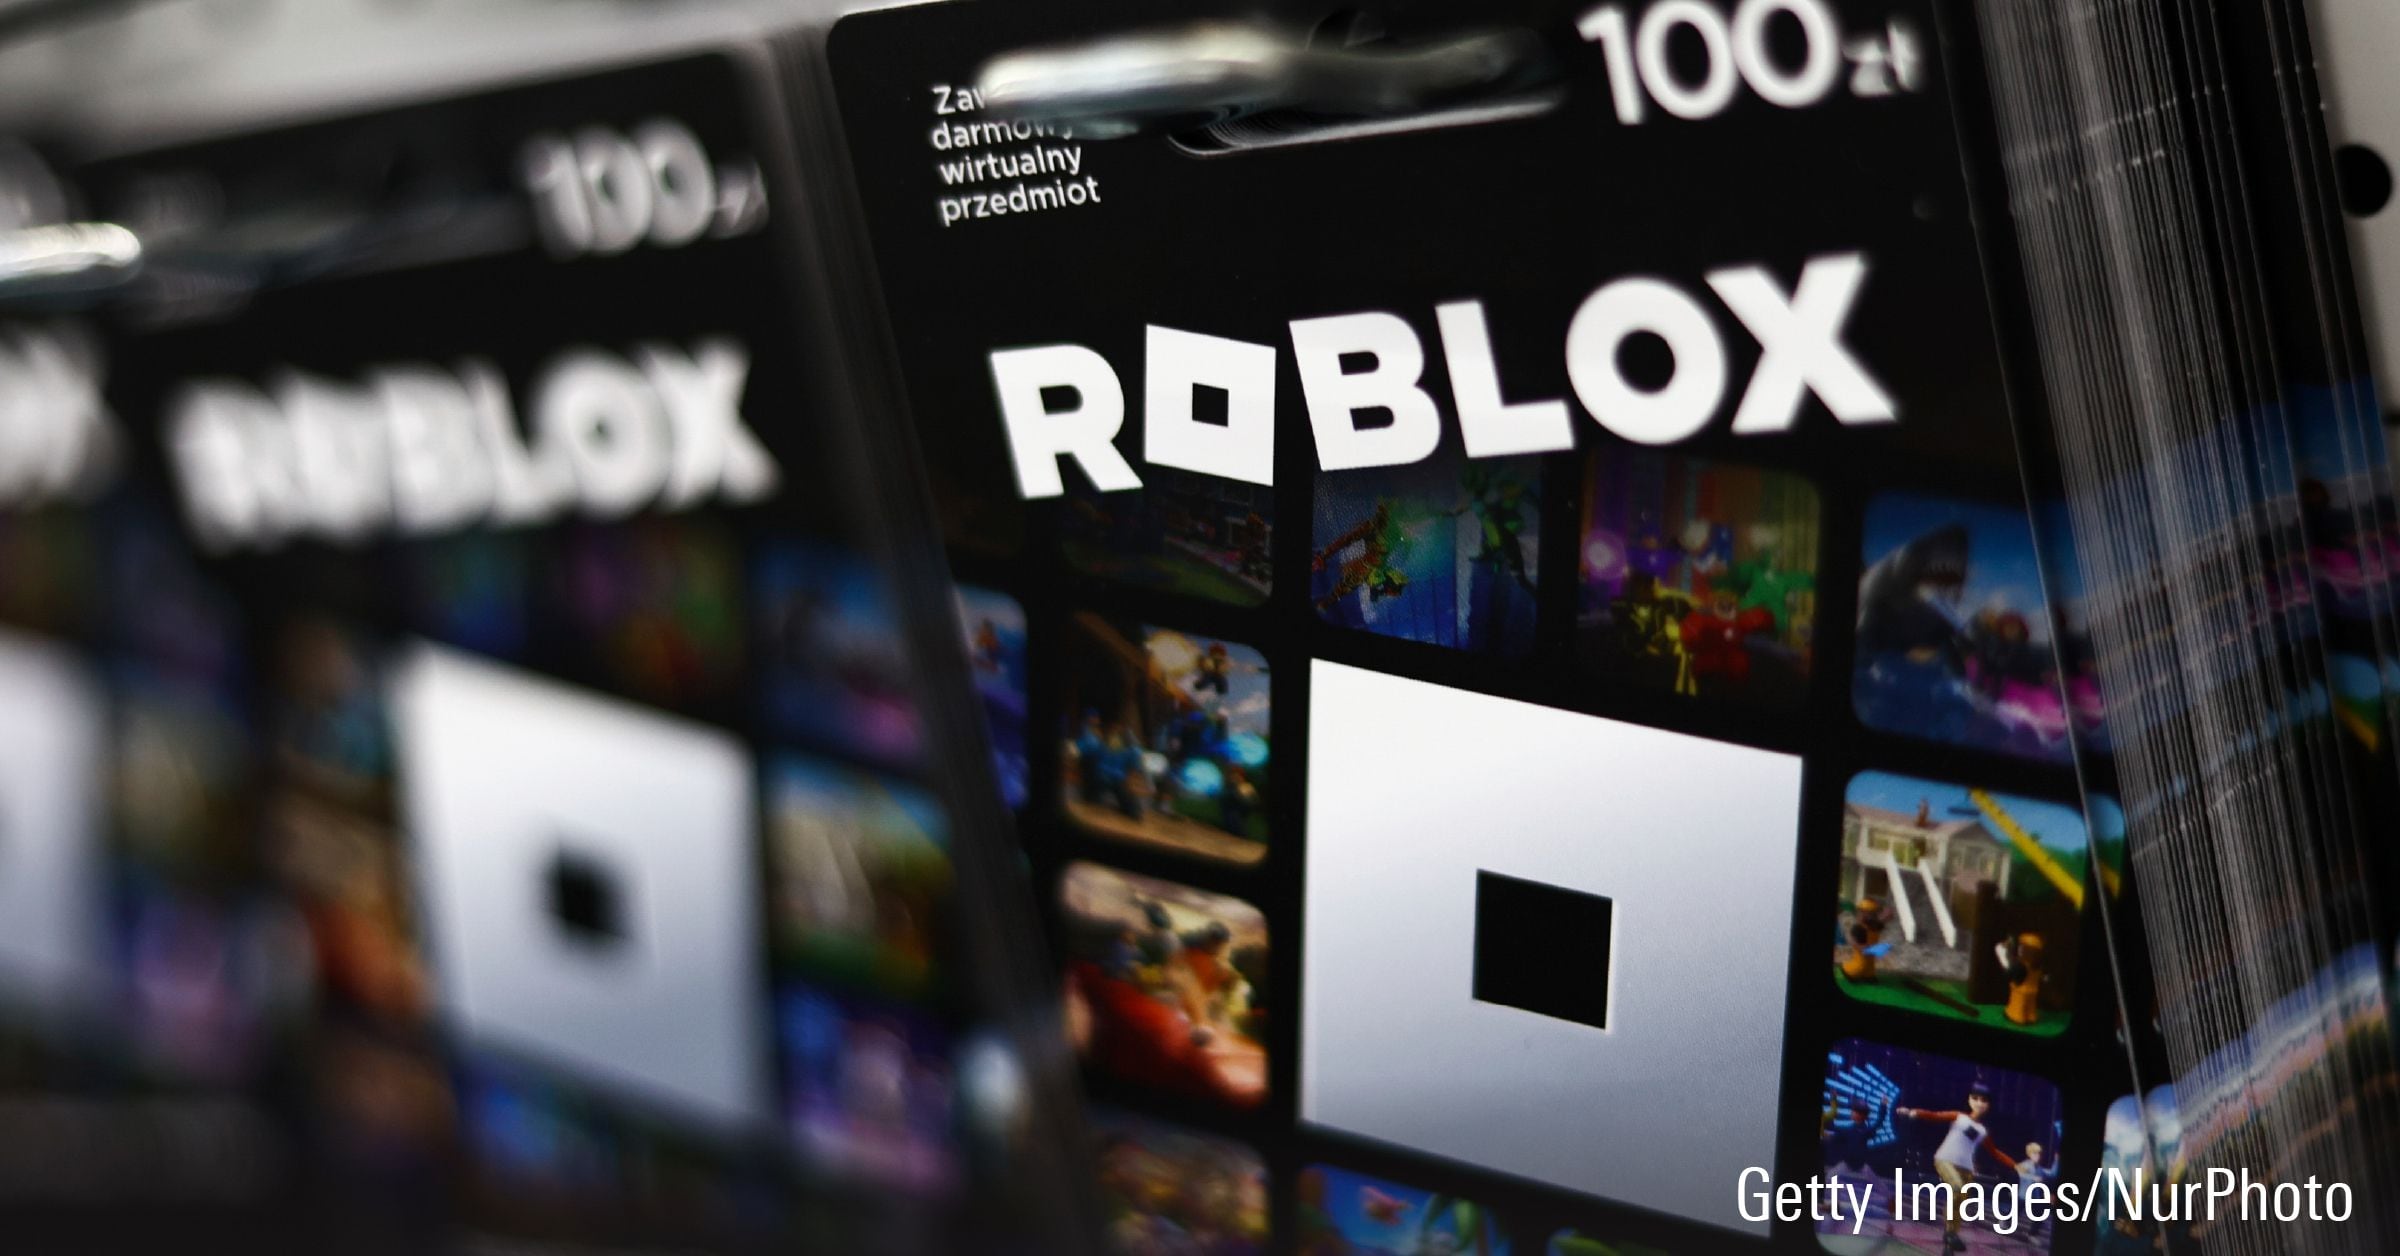 ROBLOX, Online Gaming and Being eSmart